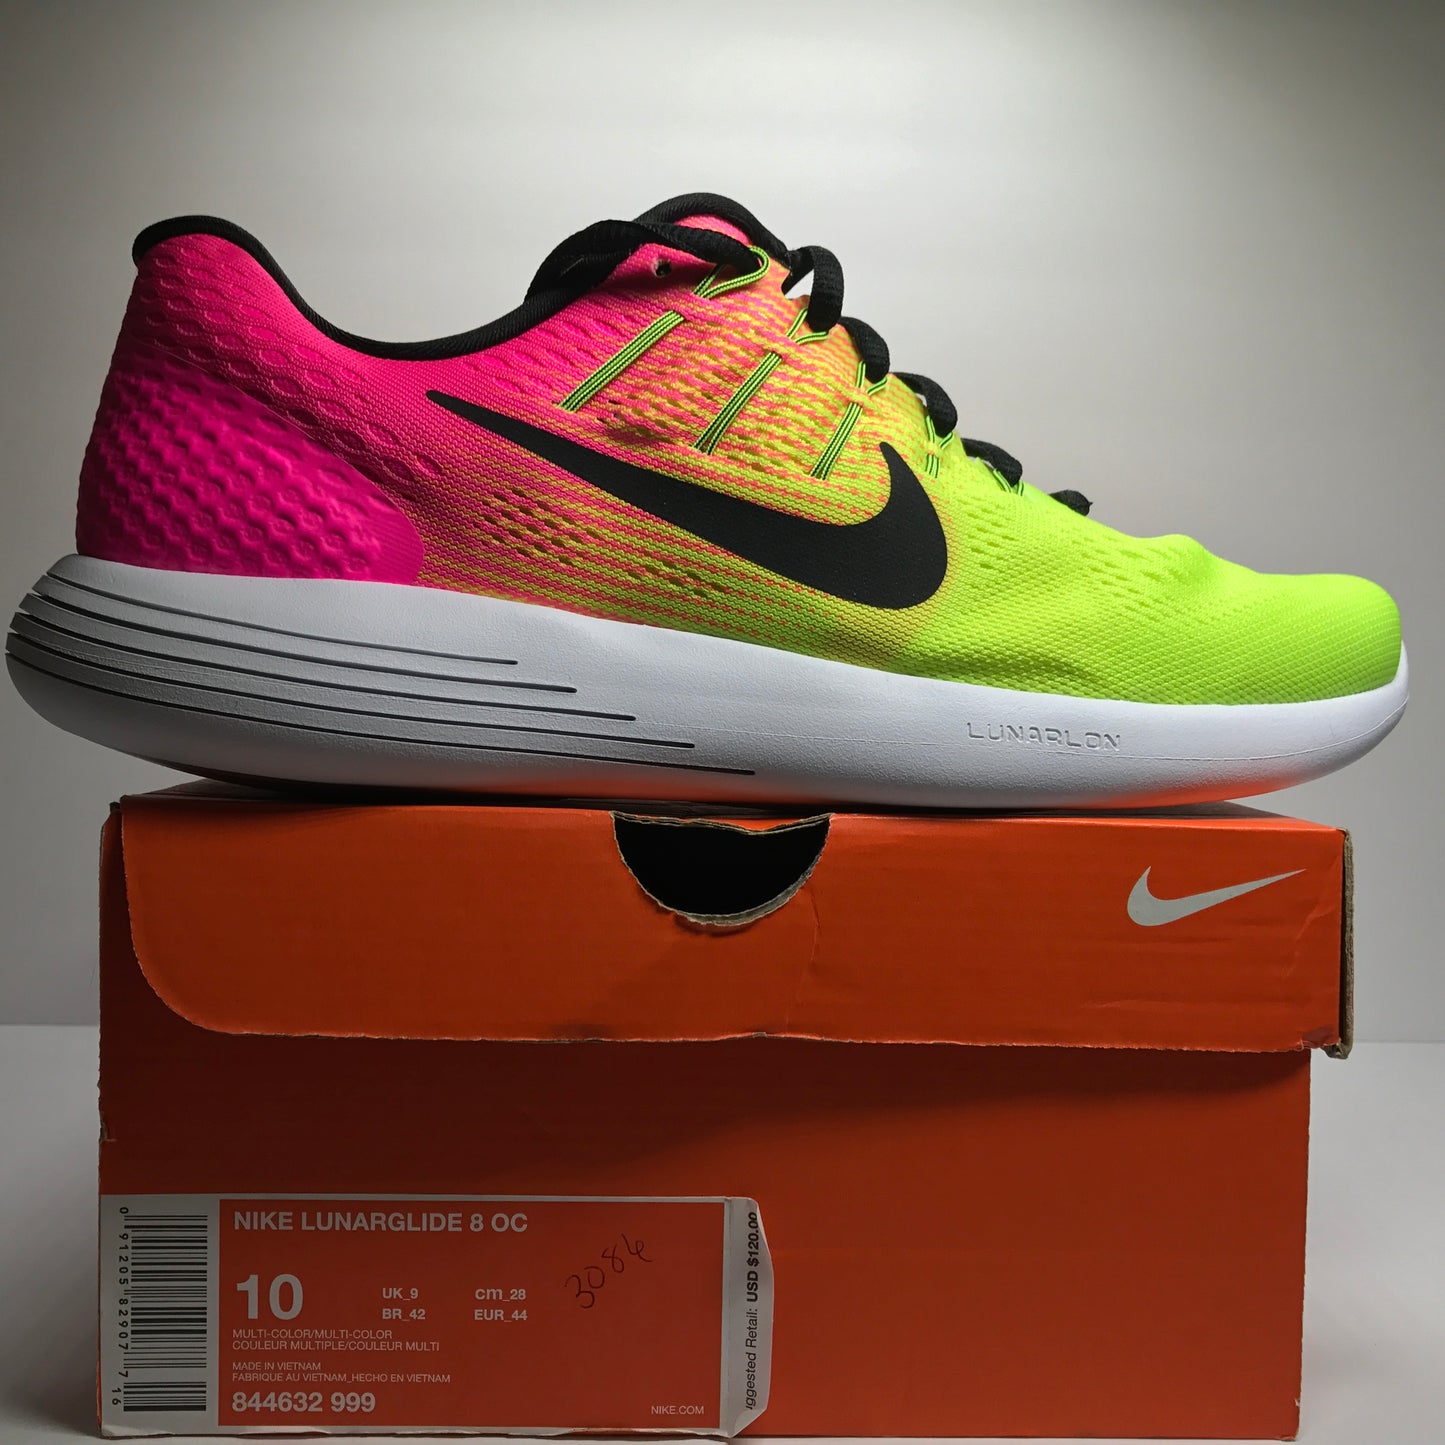 DS Nike Lunarglide 8 OC Taille 10/Taille 12